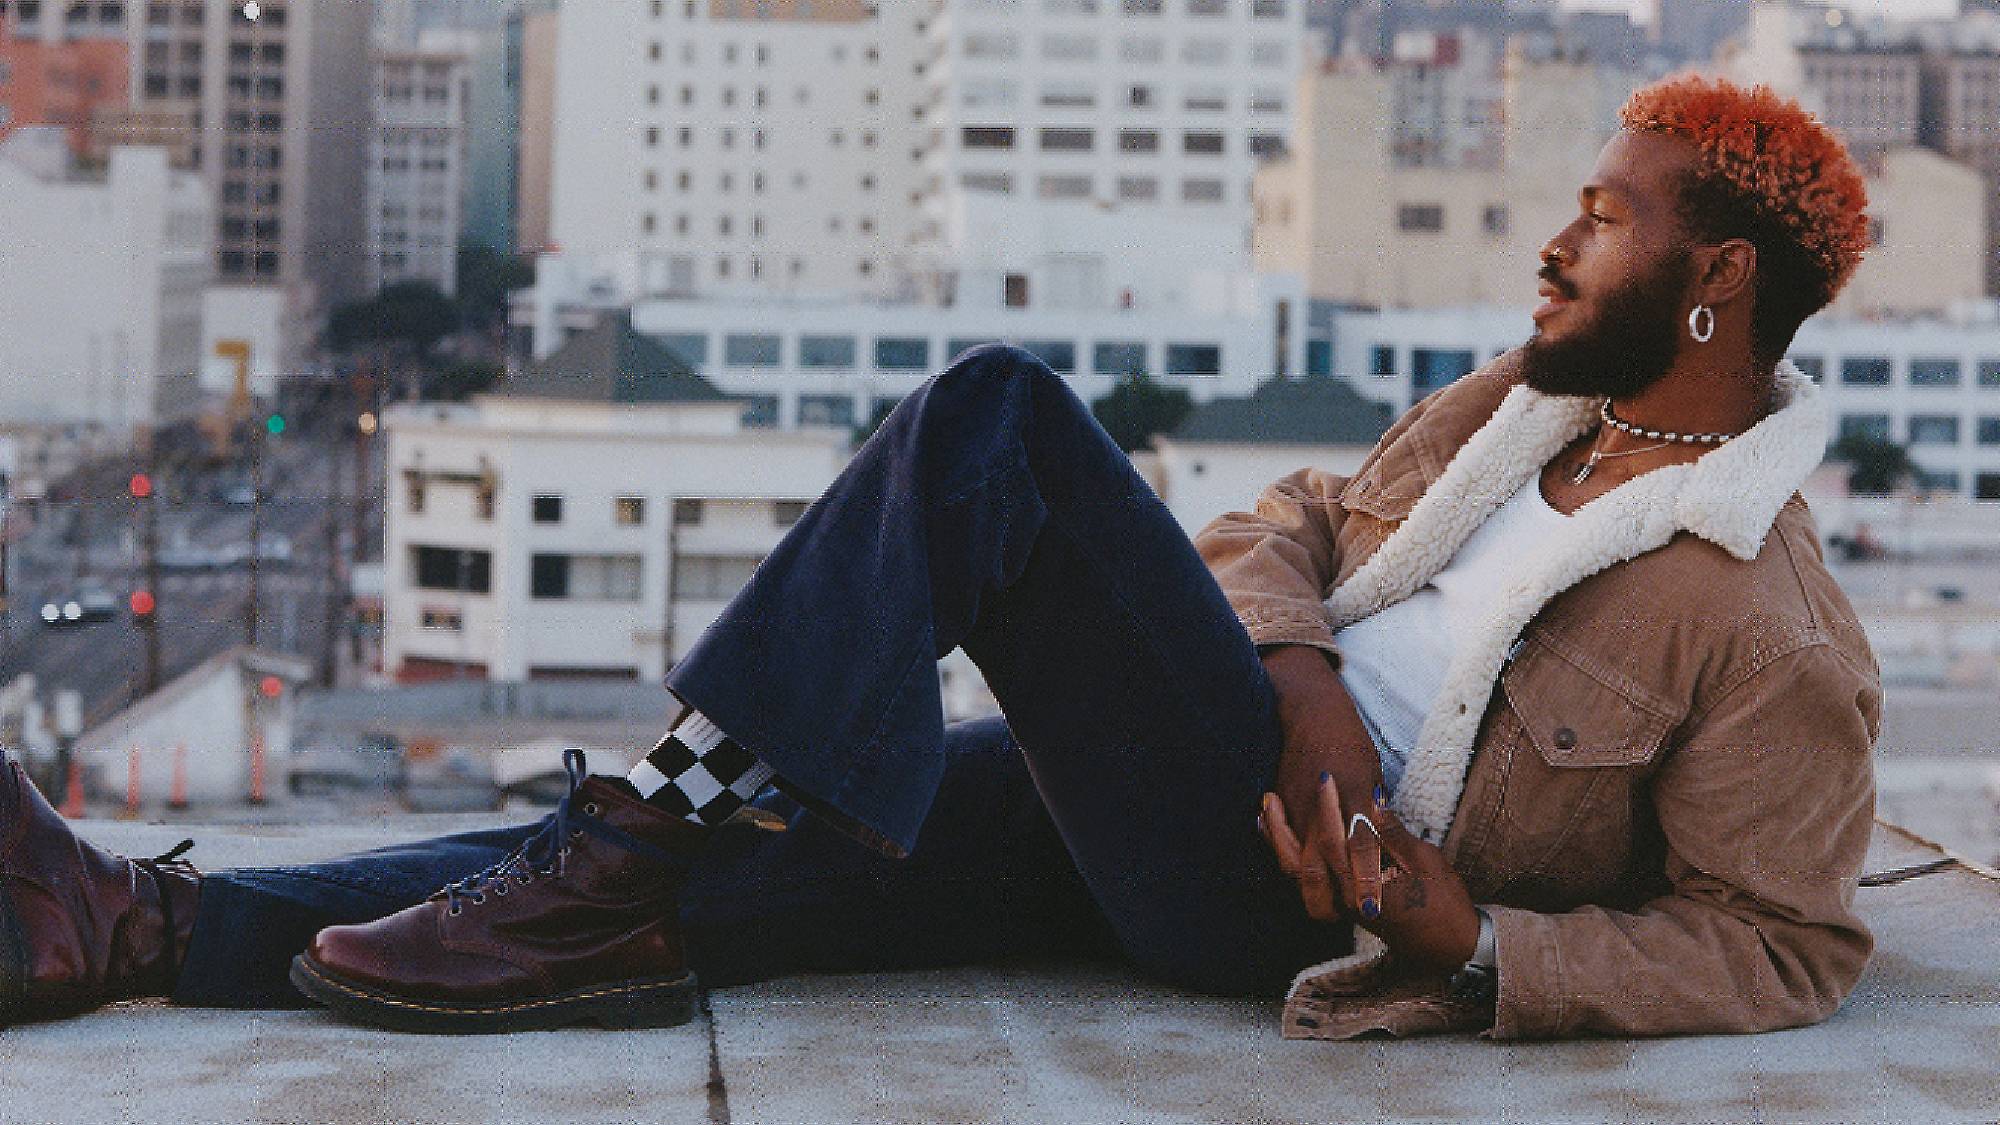 Duckwrth laying on a rooftop with a city view in the background.